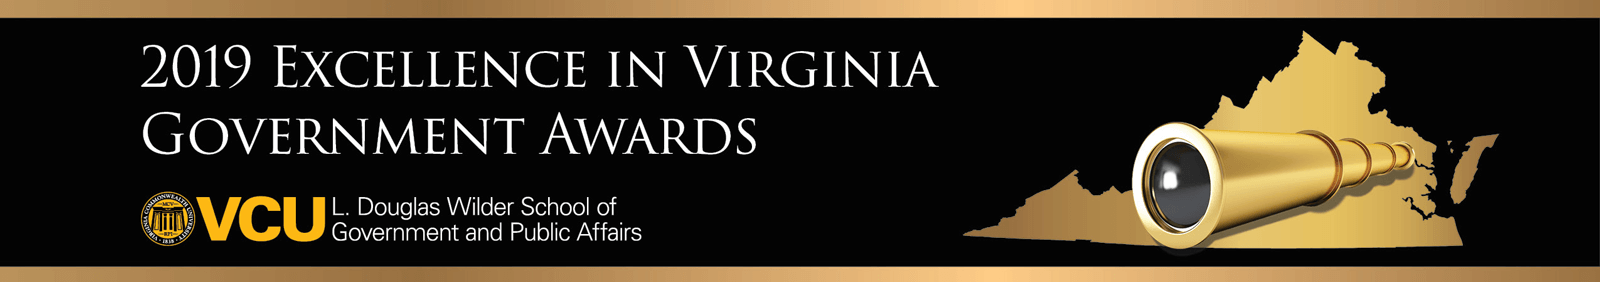 2019 Excellence in Virginia Government Awards, VCU L. Douglas Wilder School of Government and Public Affairs